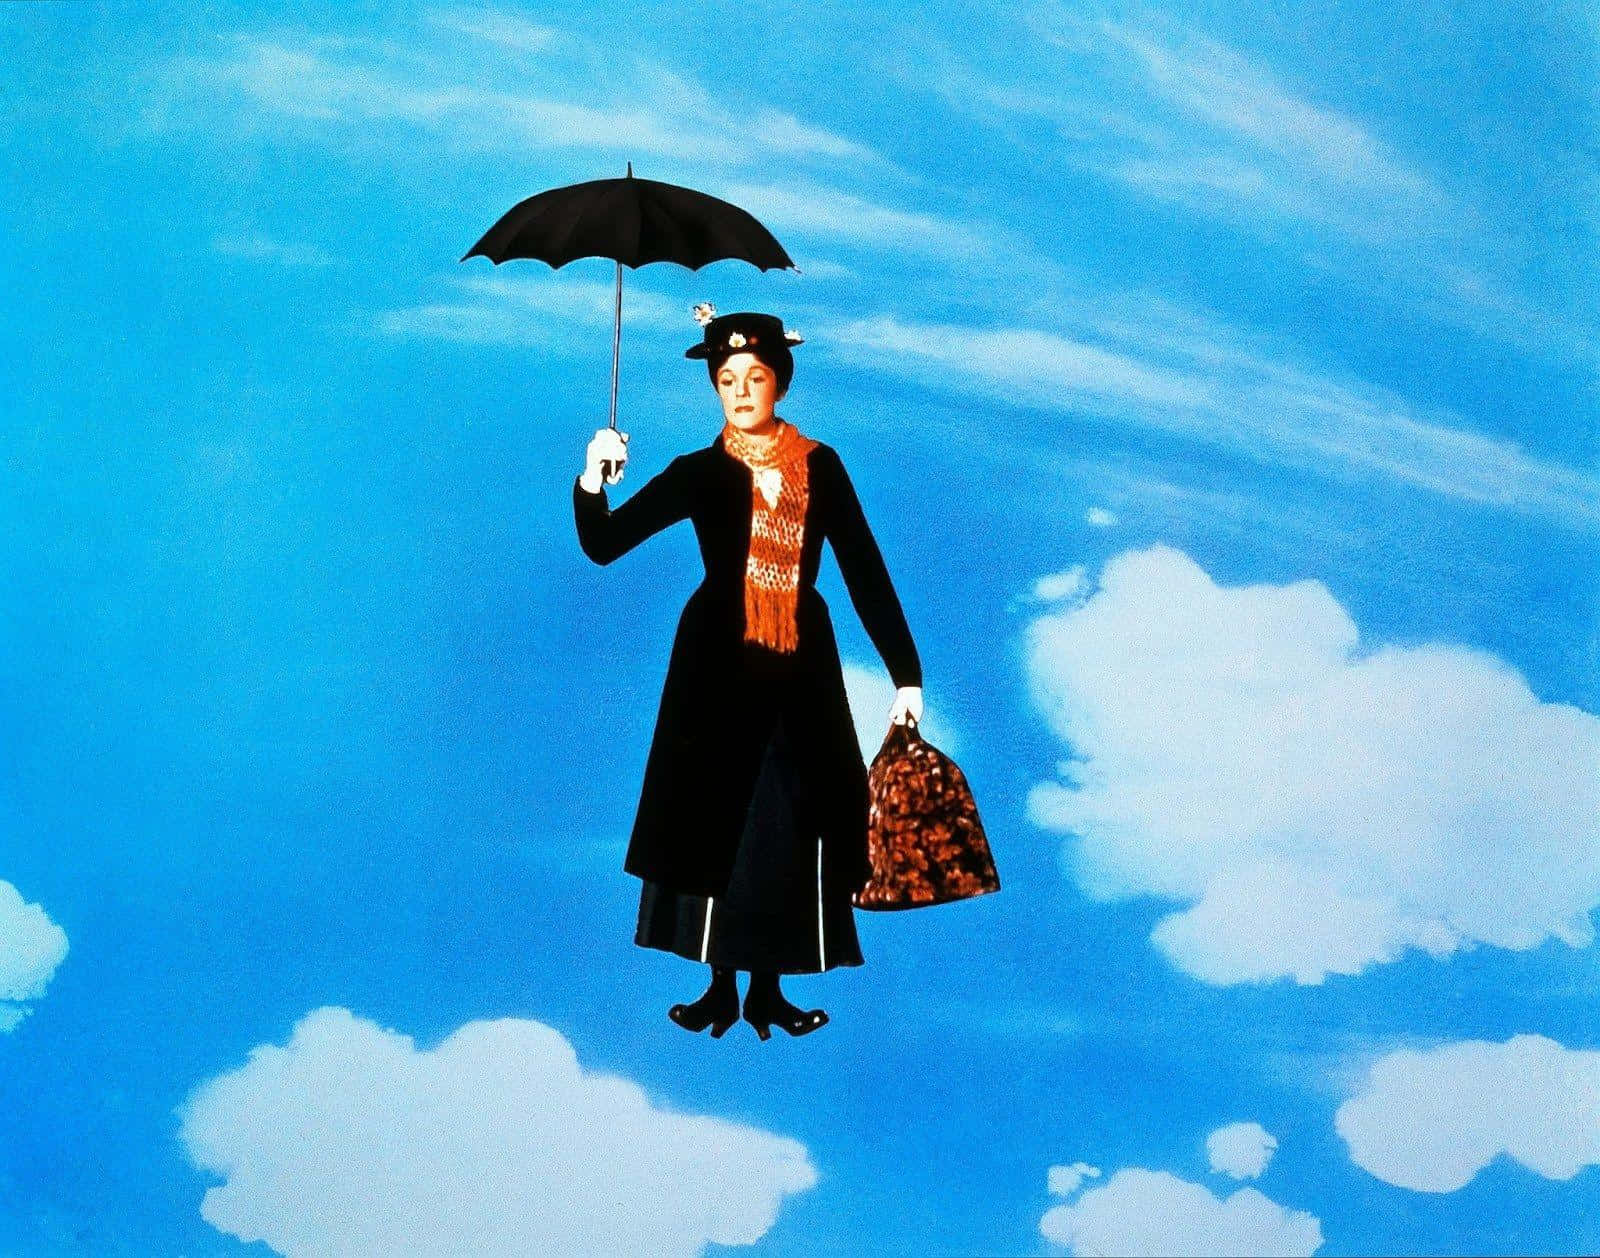 Mary Poppins and friends in the city Wallpaper